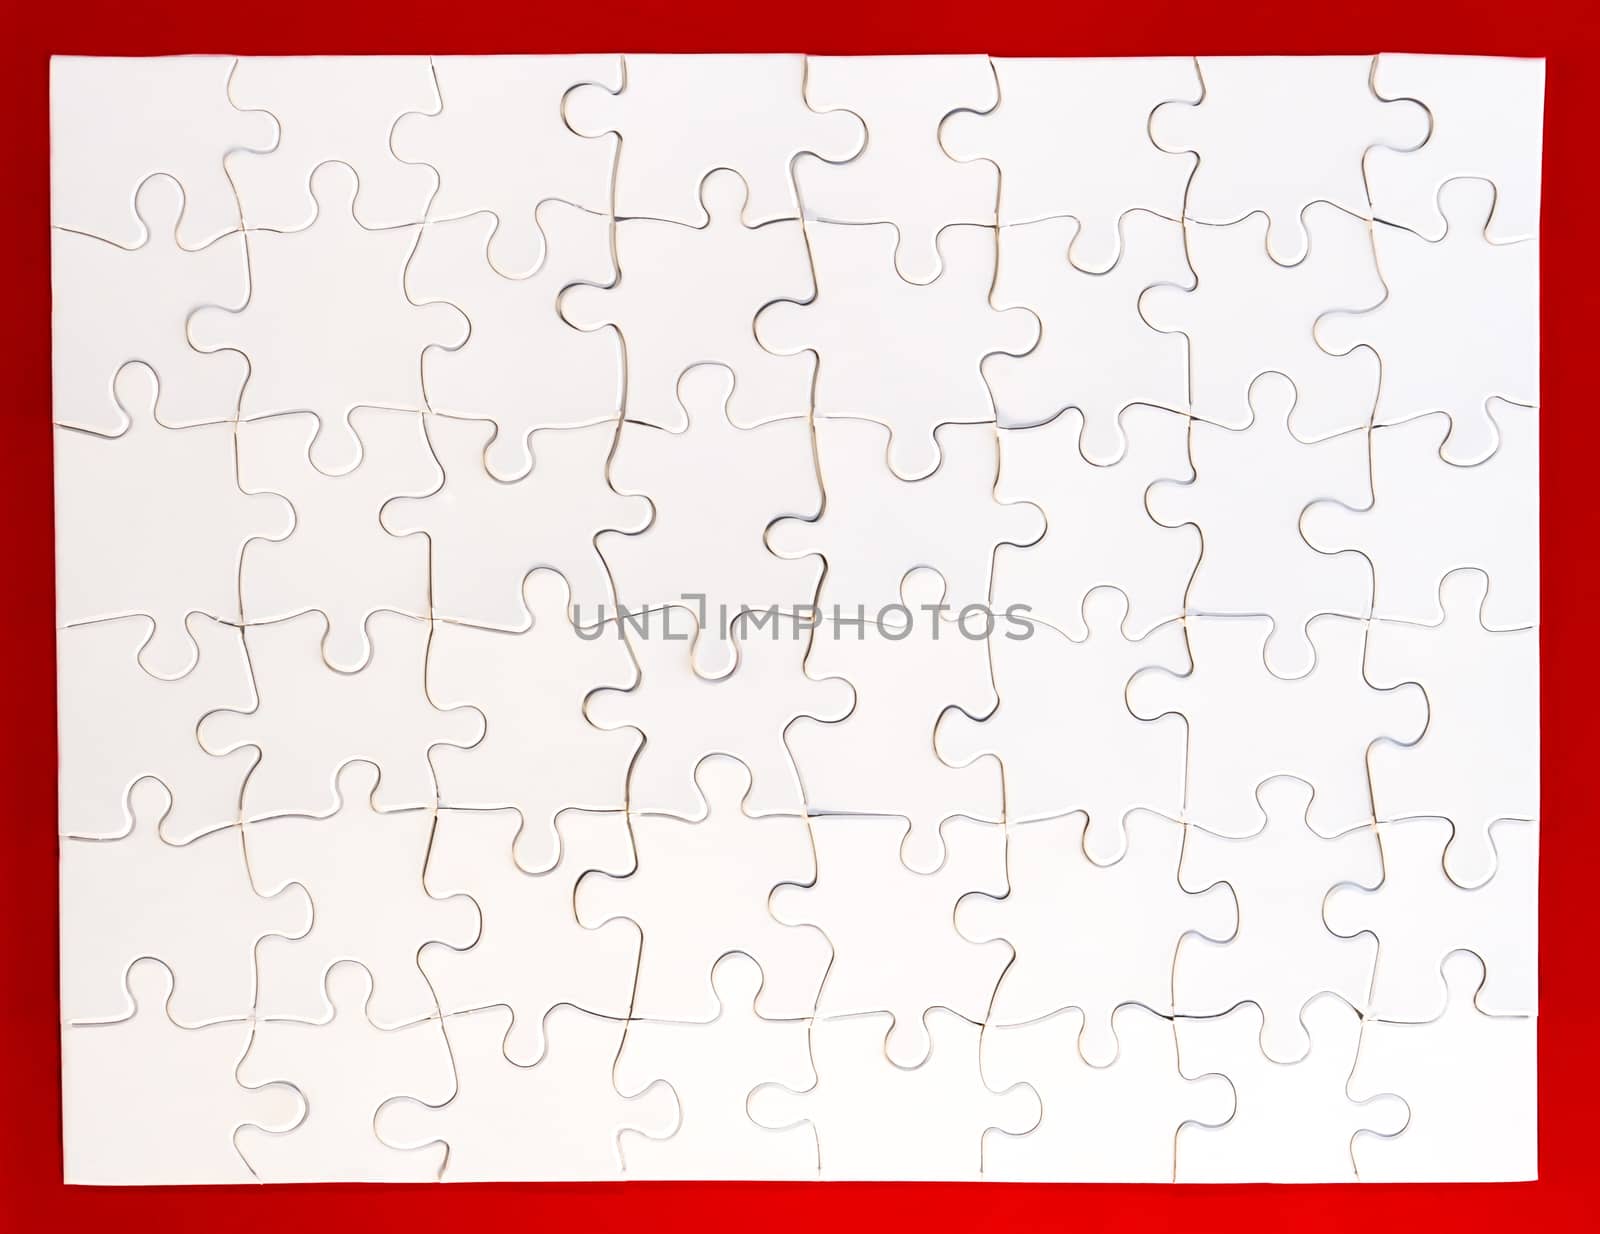 Completed white jigsaw puzzle on red background